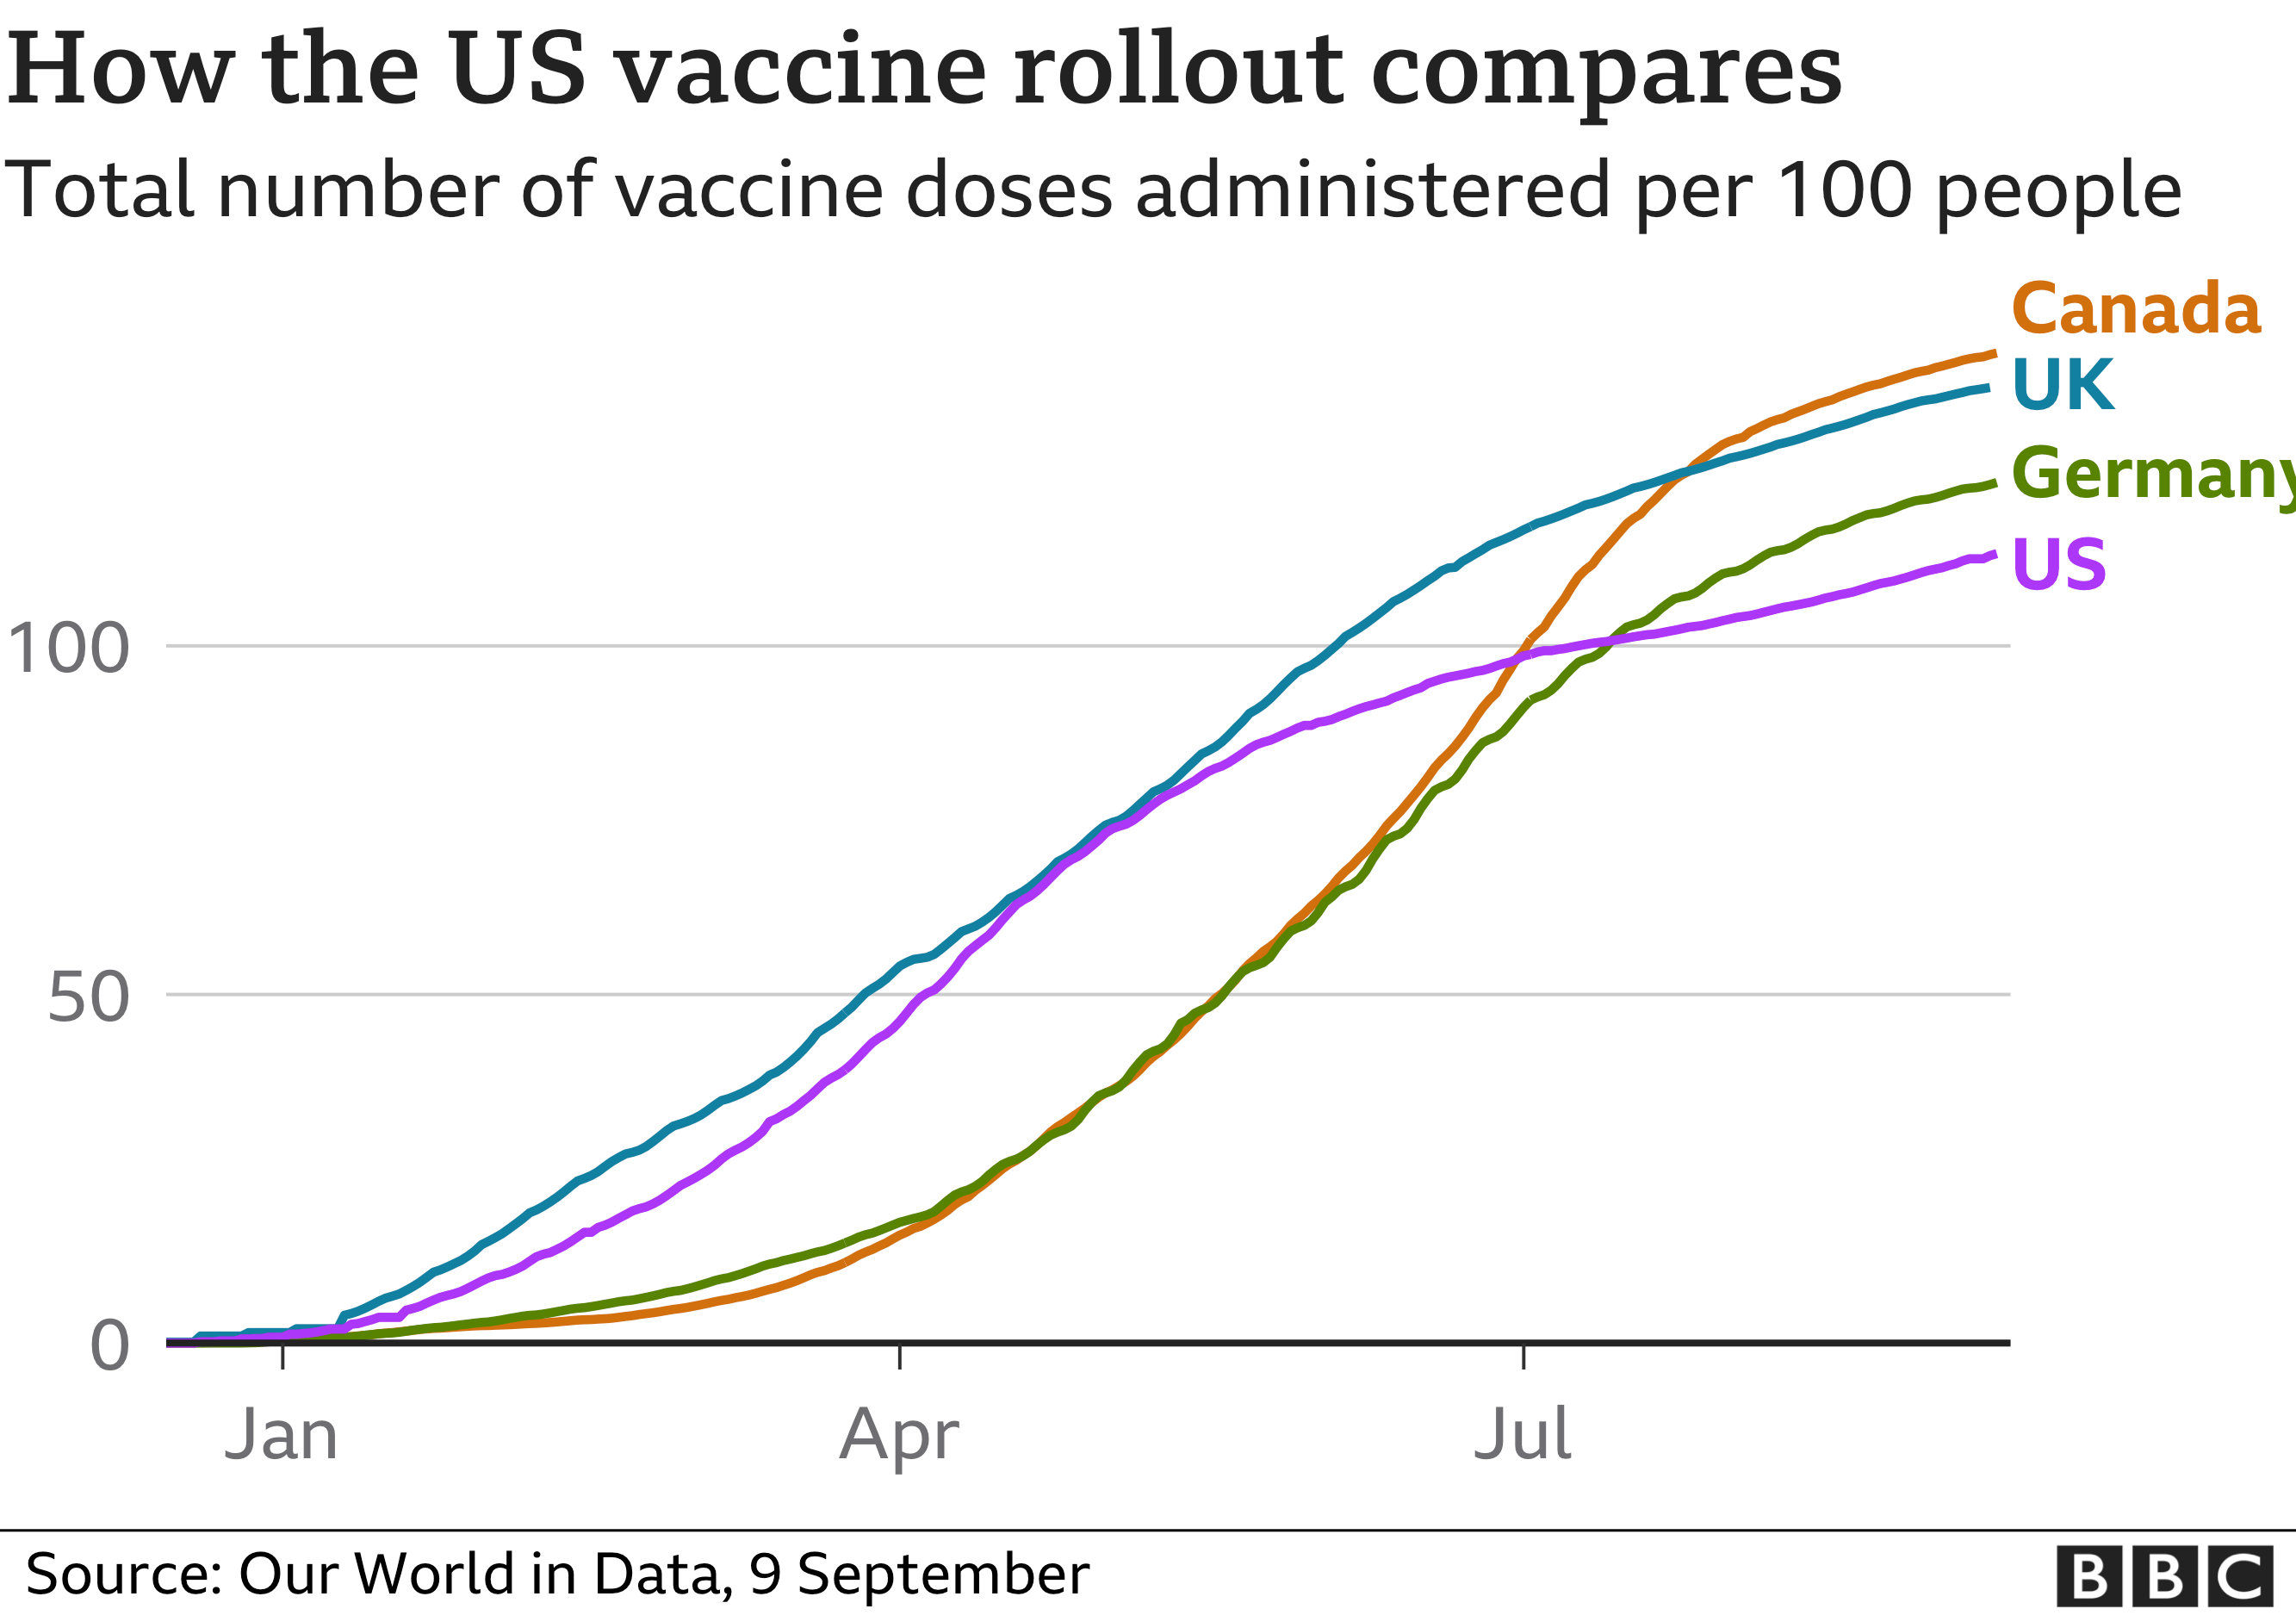 How the US vaccination rollout compares graph